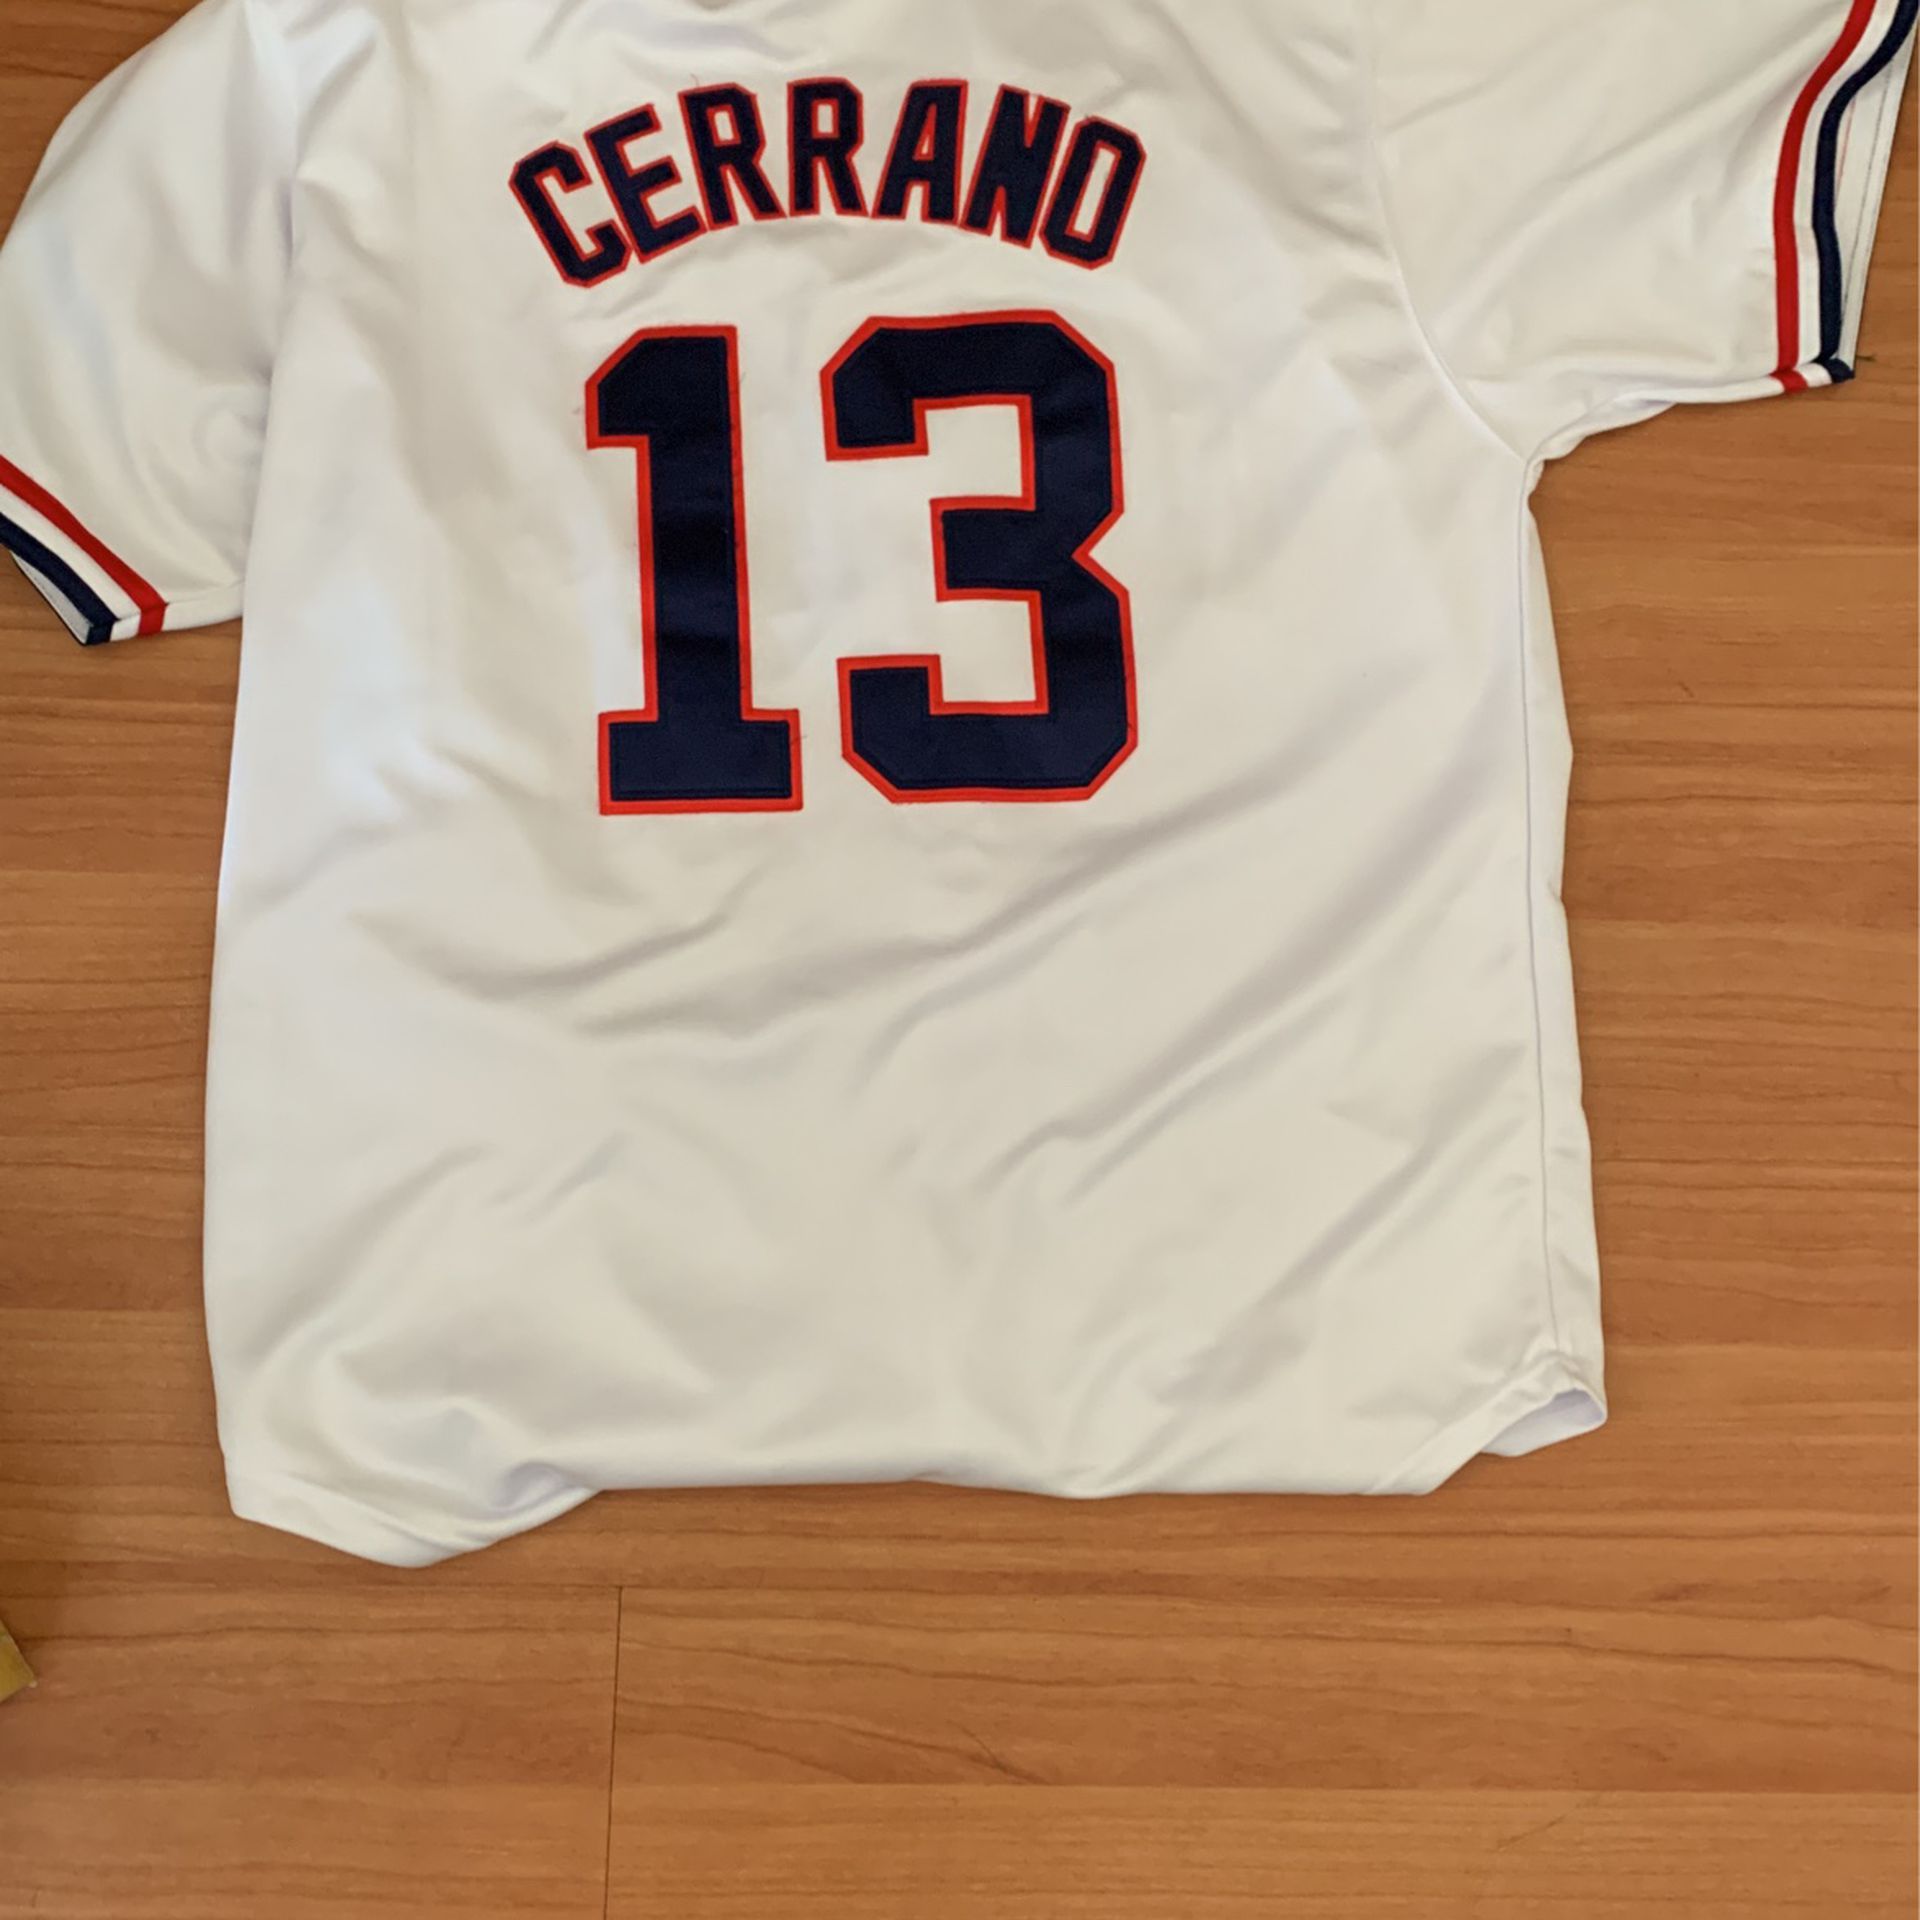 PEDRO CERRANO Cleveland Indians 1980's Majestic Baseball Throwback Jersey  for Sale in Islip Terrace, NY - OfferUp